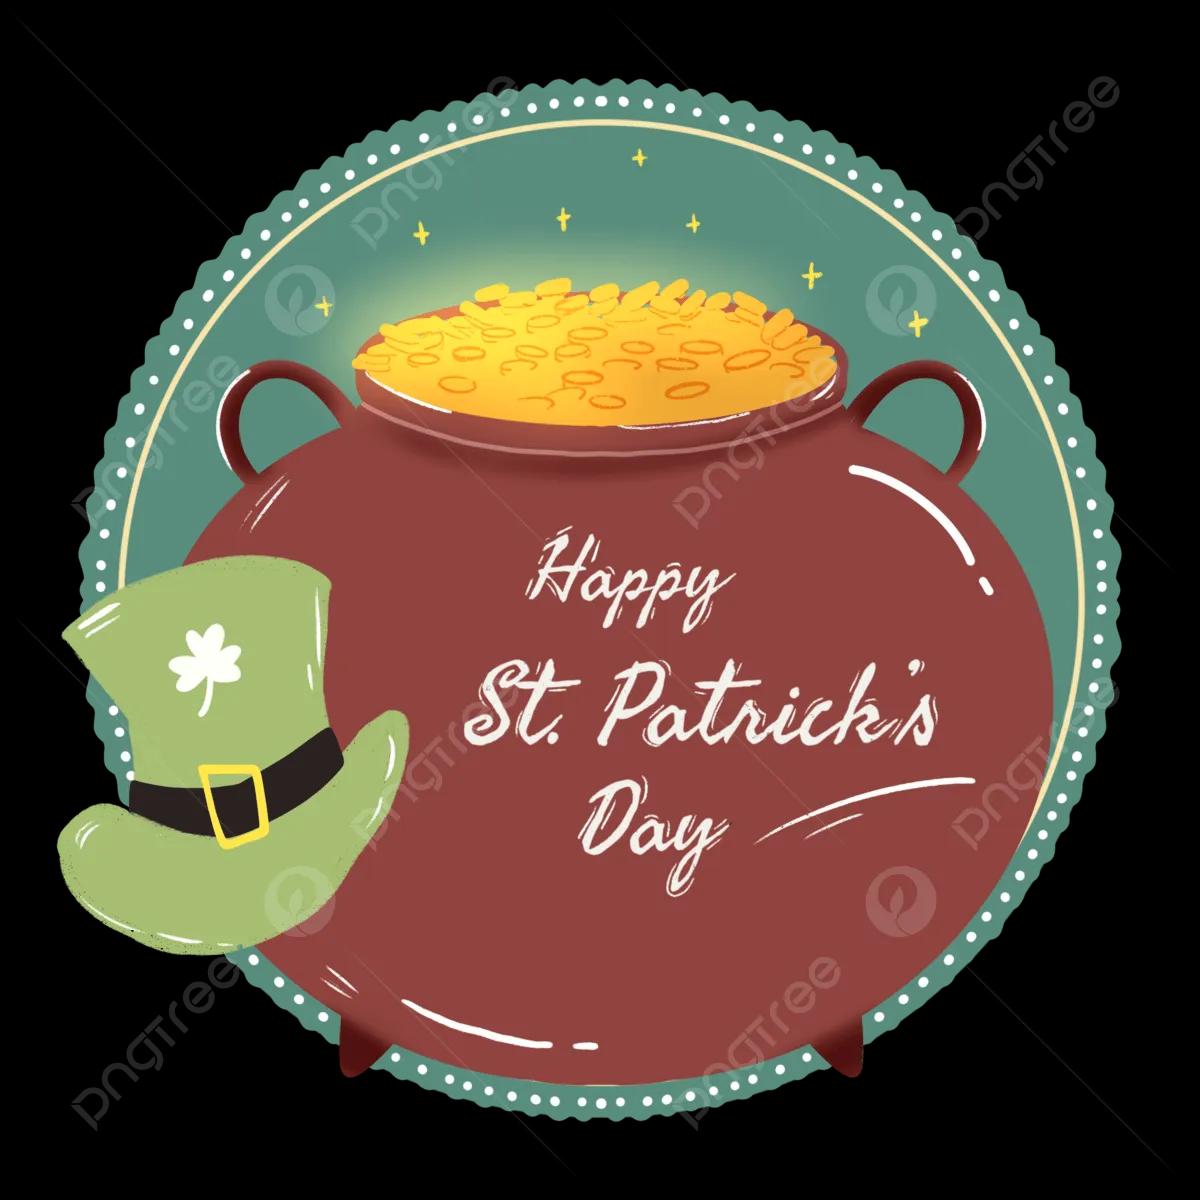 St Patrick’s Day PNG Picture, Hand Drawn Happy St Patricks Day Logo ...